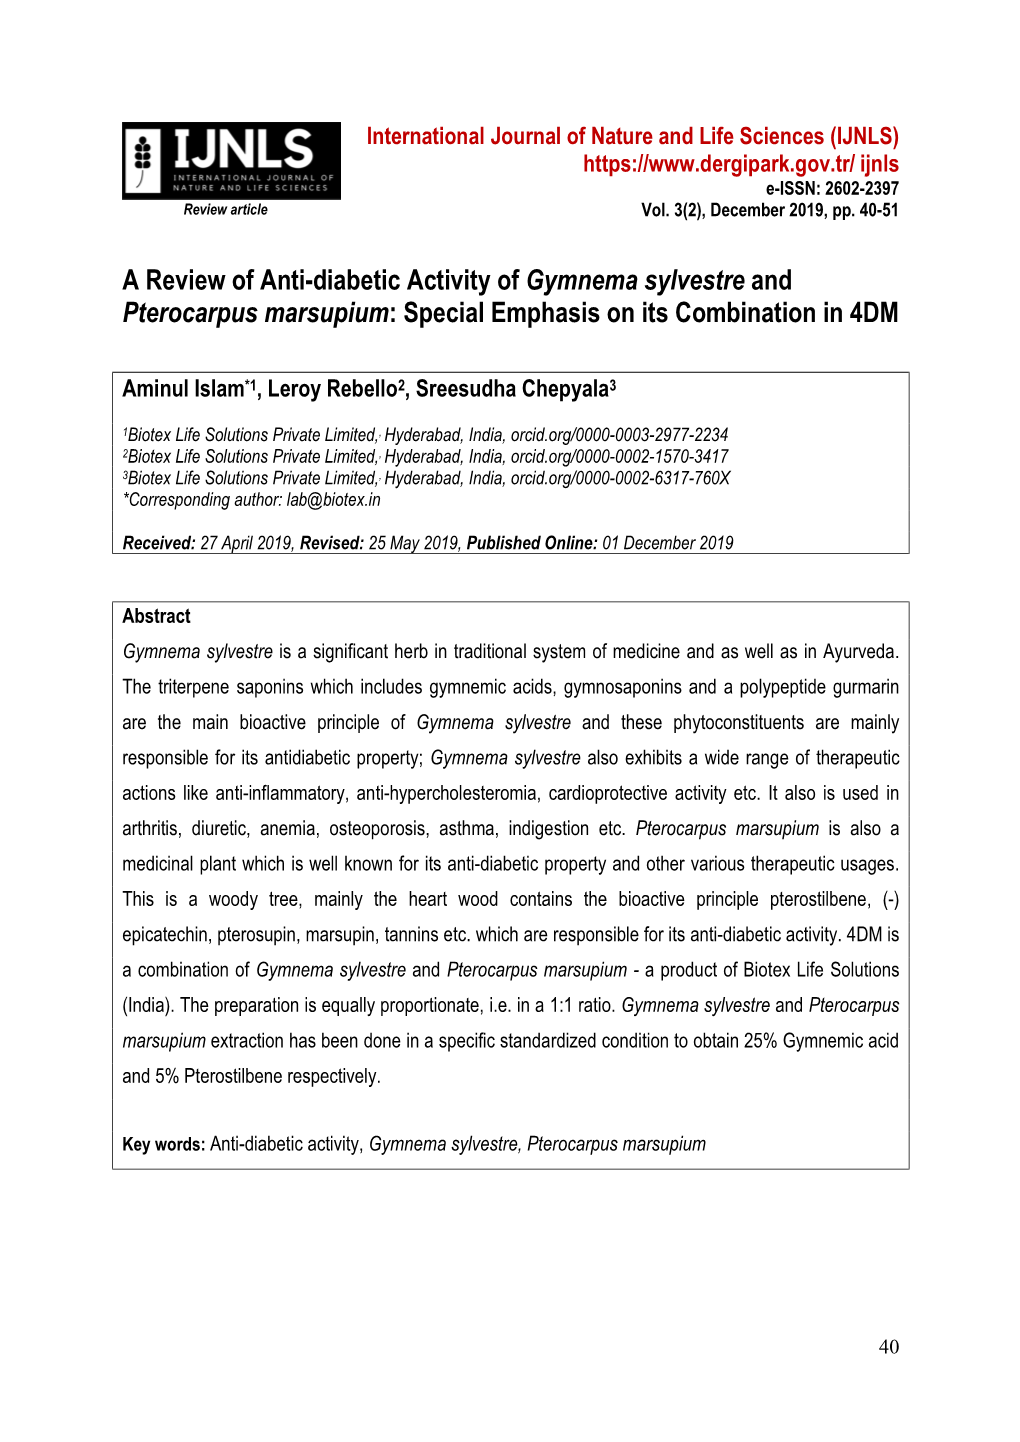 A Review of Anti-Diabetic Activity of Gymnema Sylvestre and Pterocarpus Marsupium: Special Emphasis on Its Combination in 4DM